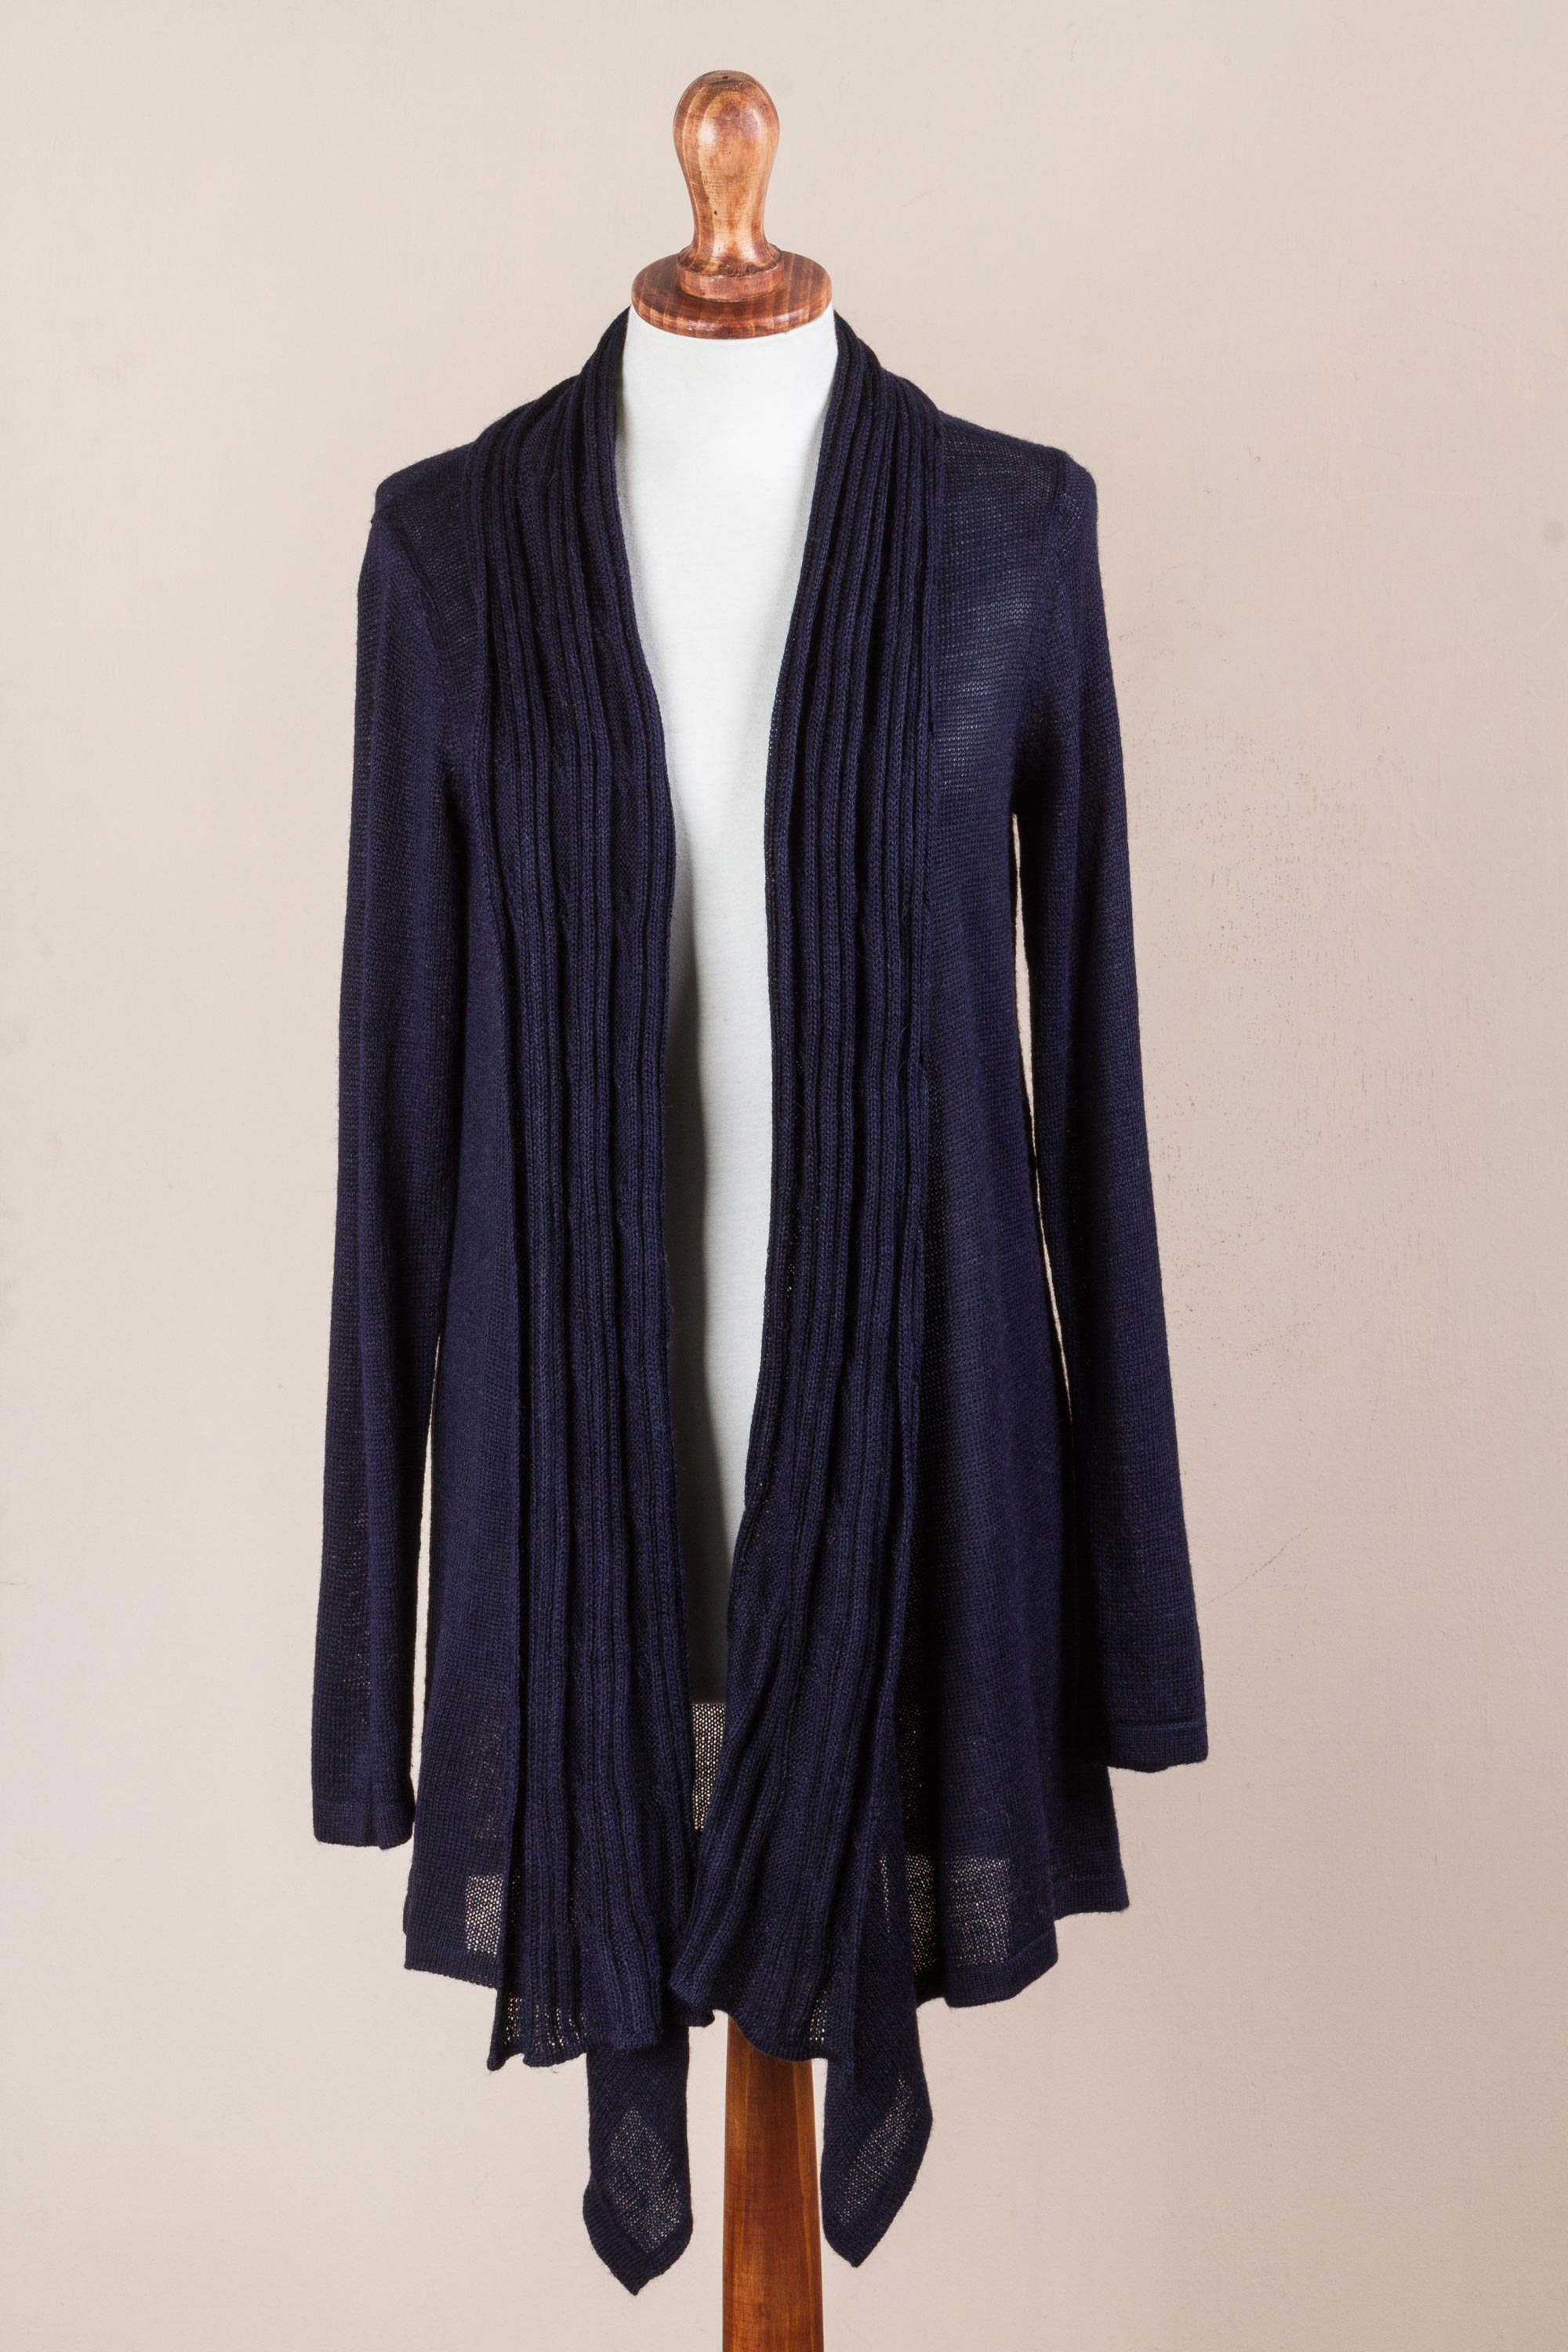 Long Sleeved Navy Blue Cardigan Sweater from Peru - Navy Waterfall ...